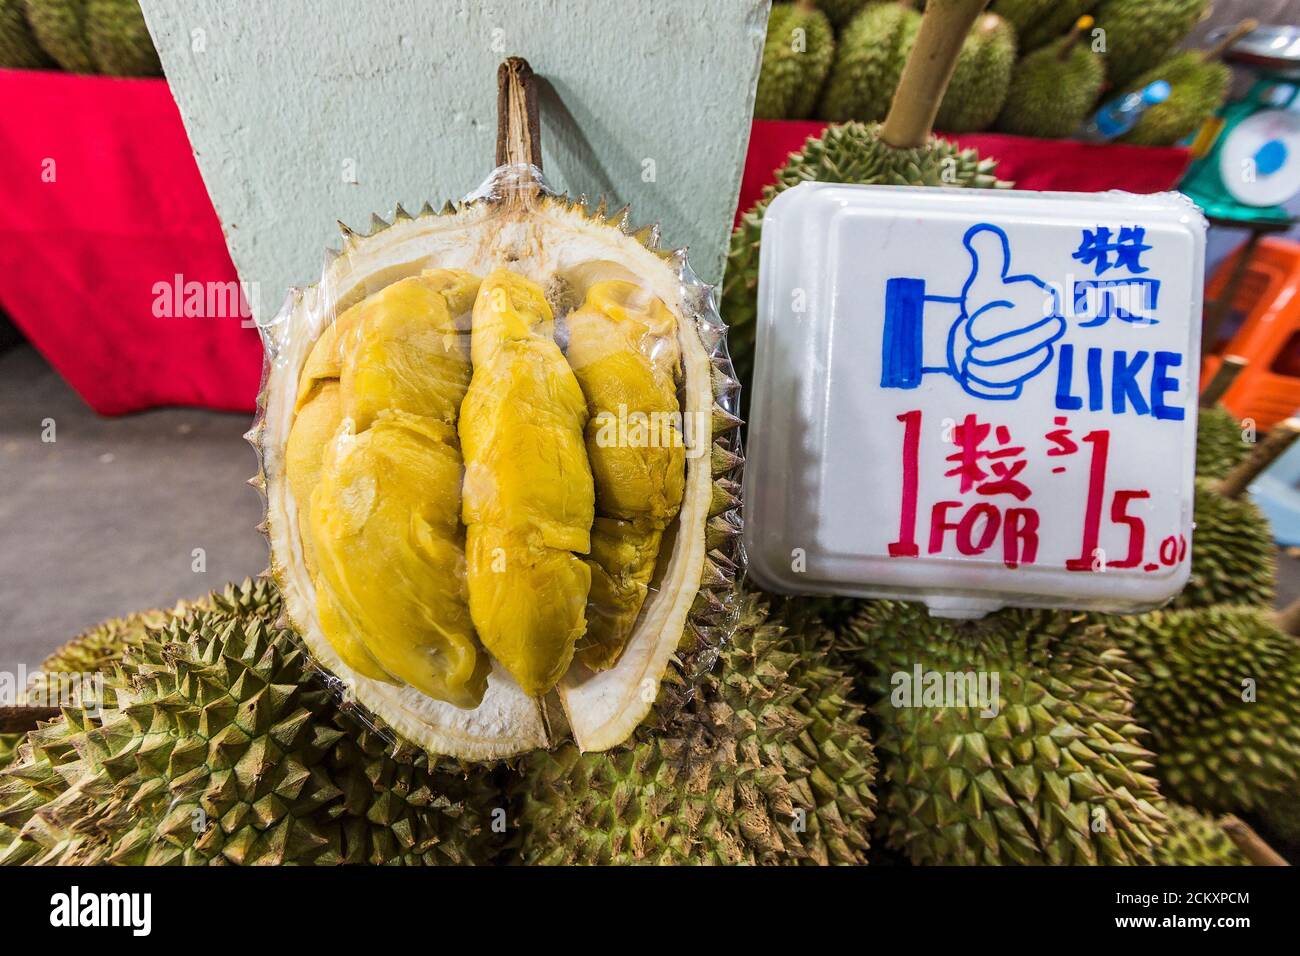 Famously smelly durian fruit, for sale at a night market in Singapore. The sickly sweet smell from this fruit is so intense, it is banned from some public transportation and hotels in tropical Asia. Stock Photo